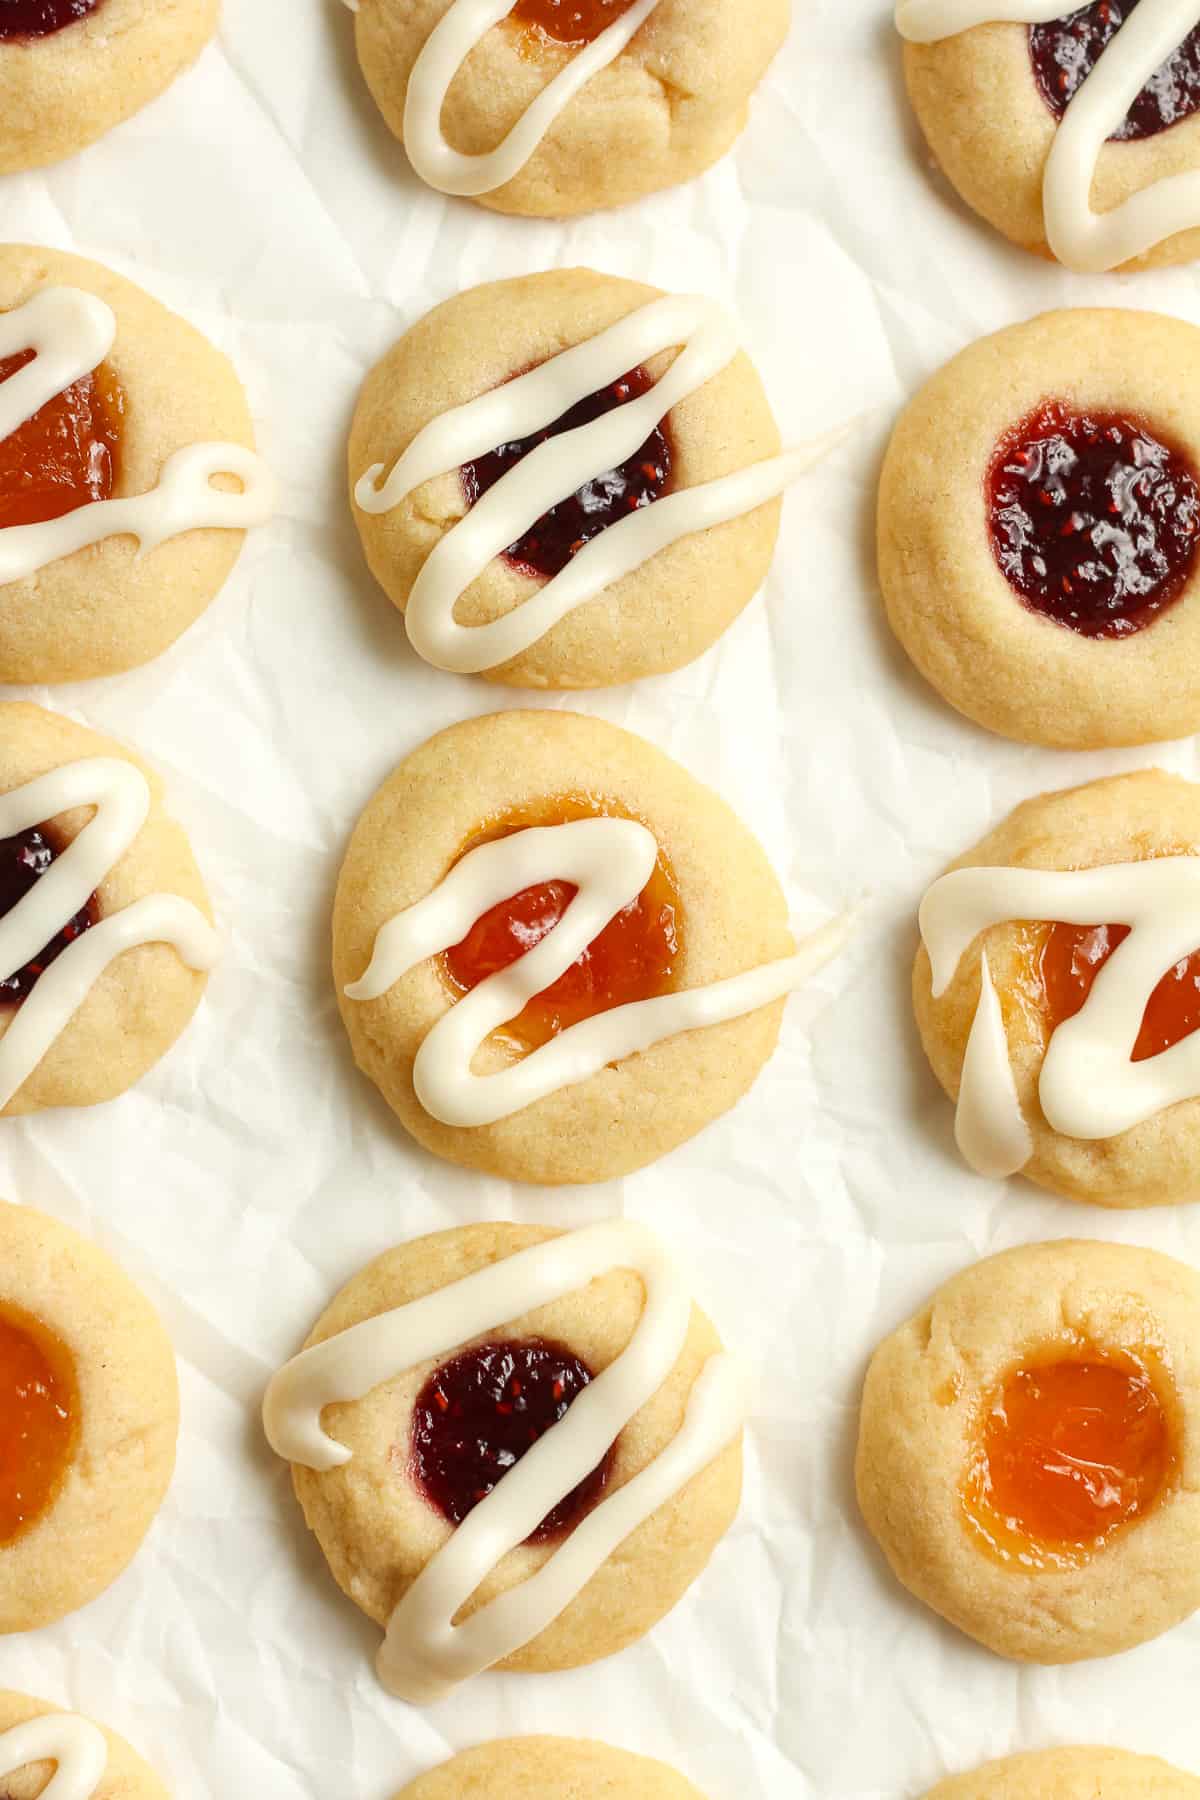 Glazed shortbread cookies filled with jam.